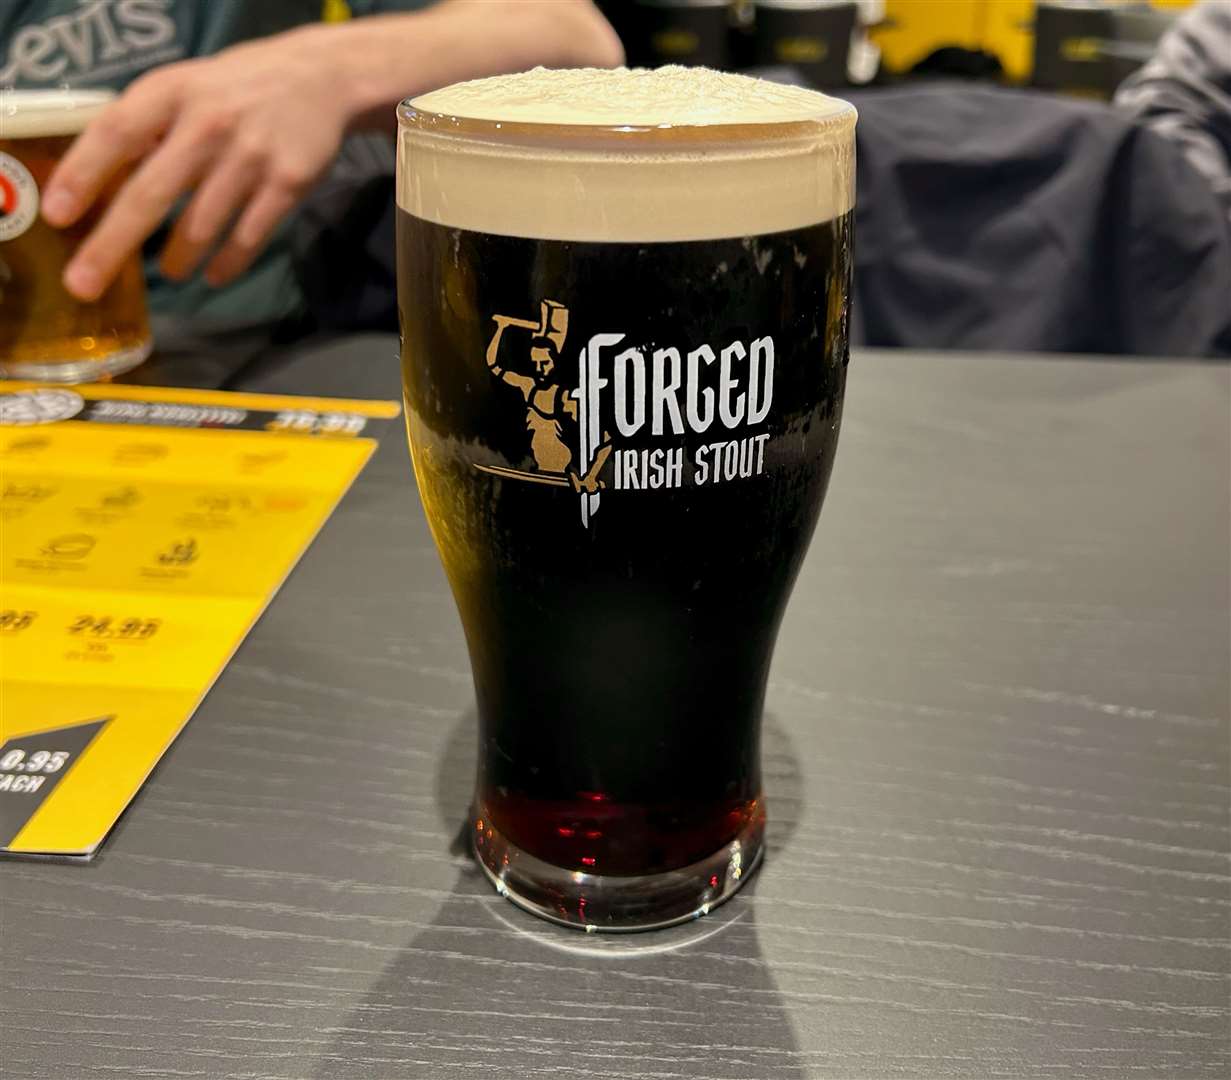 A pint of Forged Irish Stout, which is owned by UFC star Conor Mcgregor